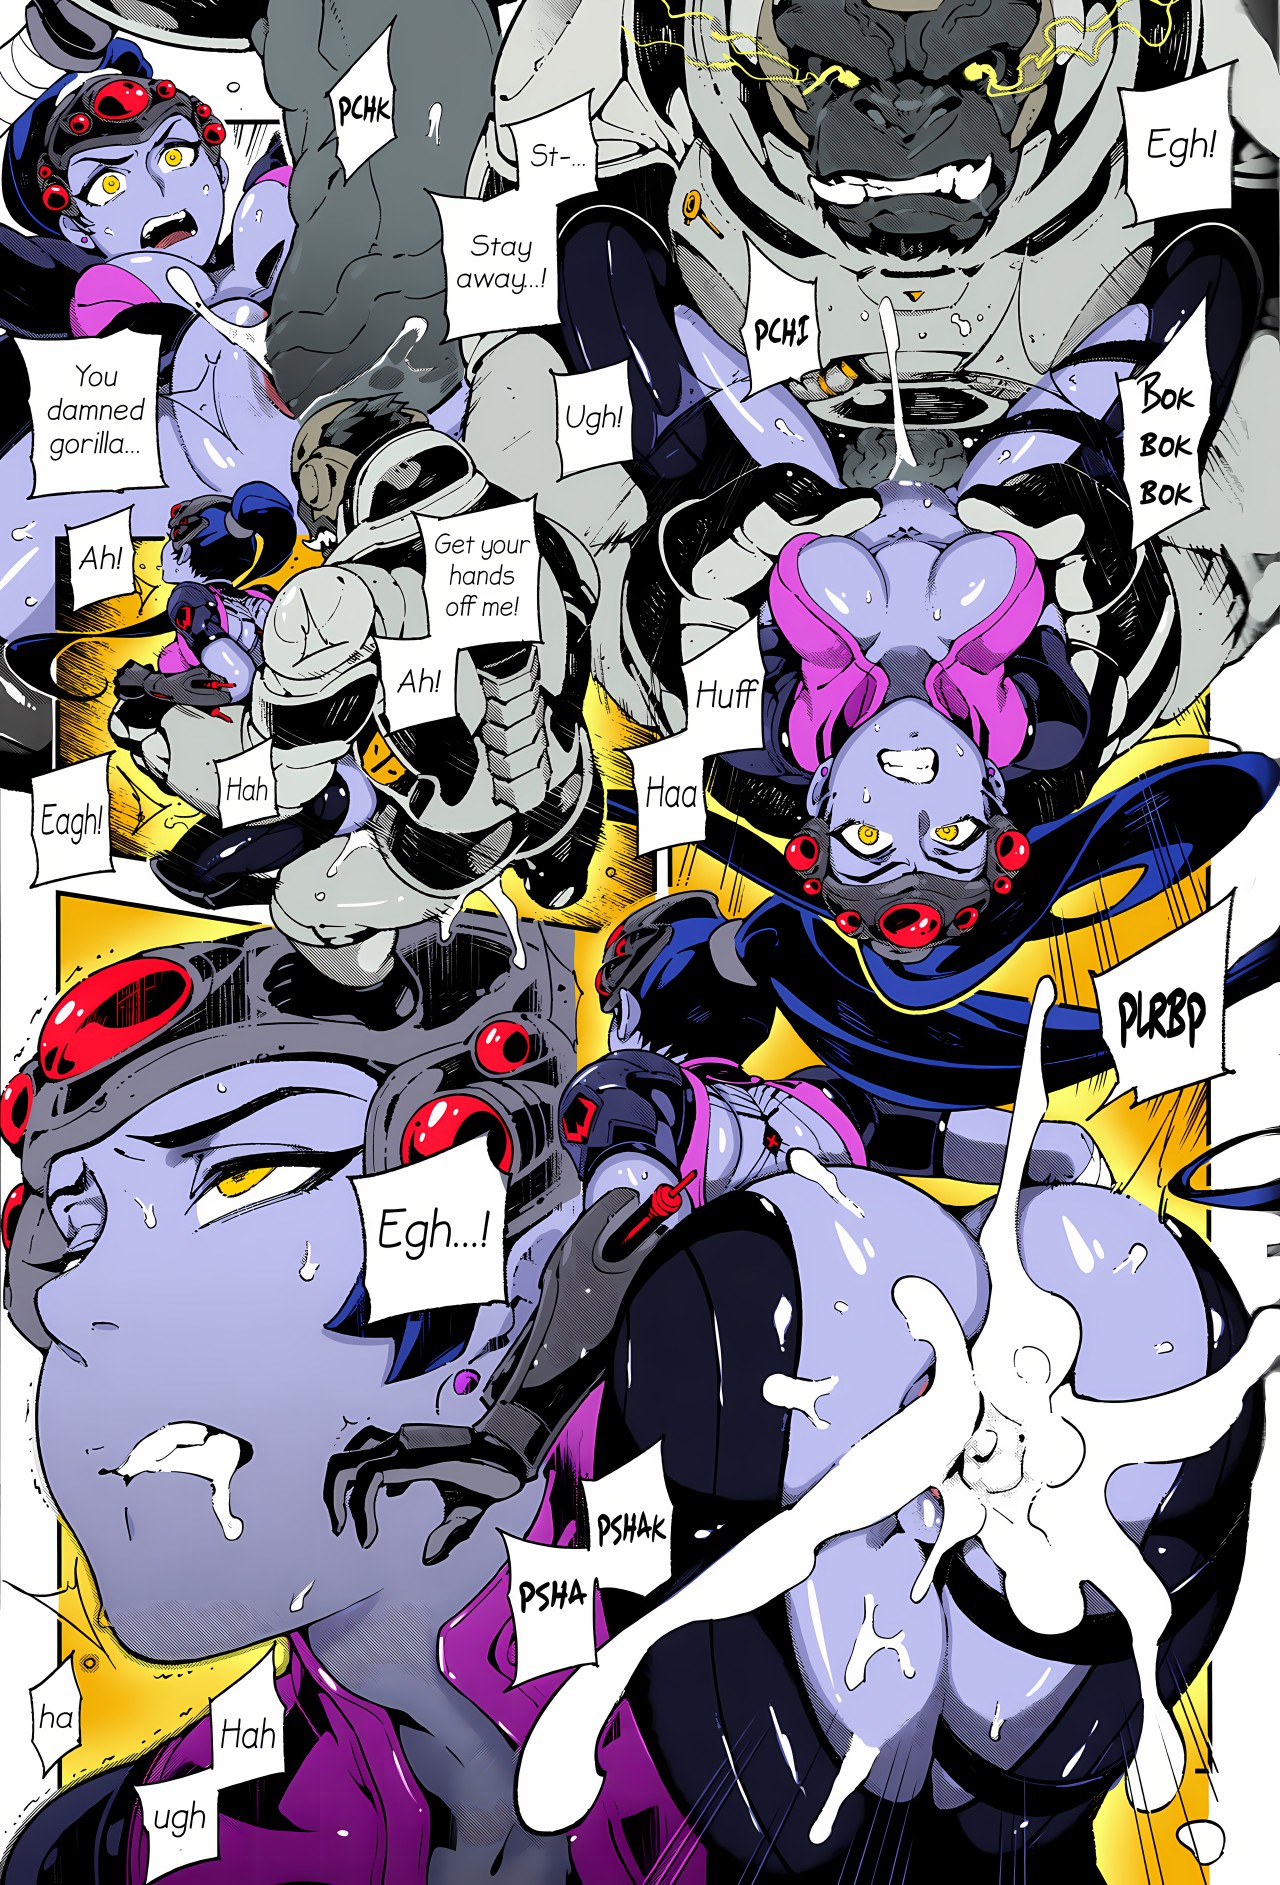 Overtime!! Overwatch Fanbook Part 1 Porn Comic english 22